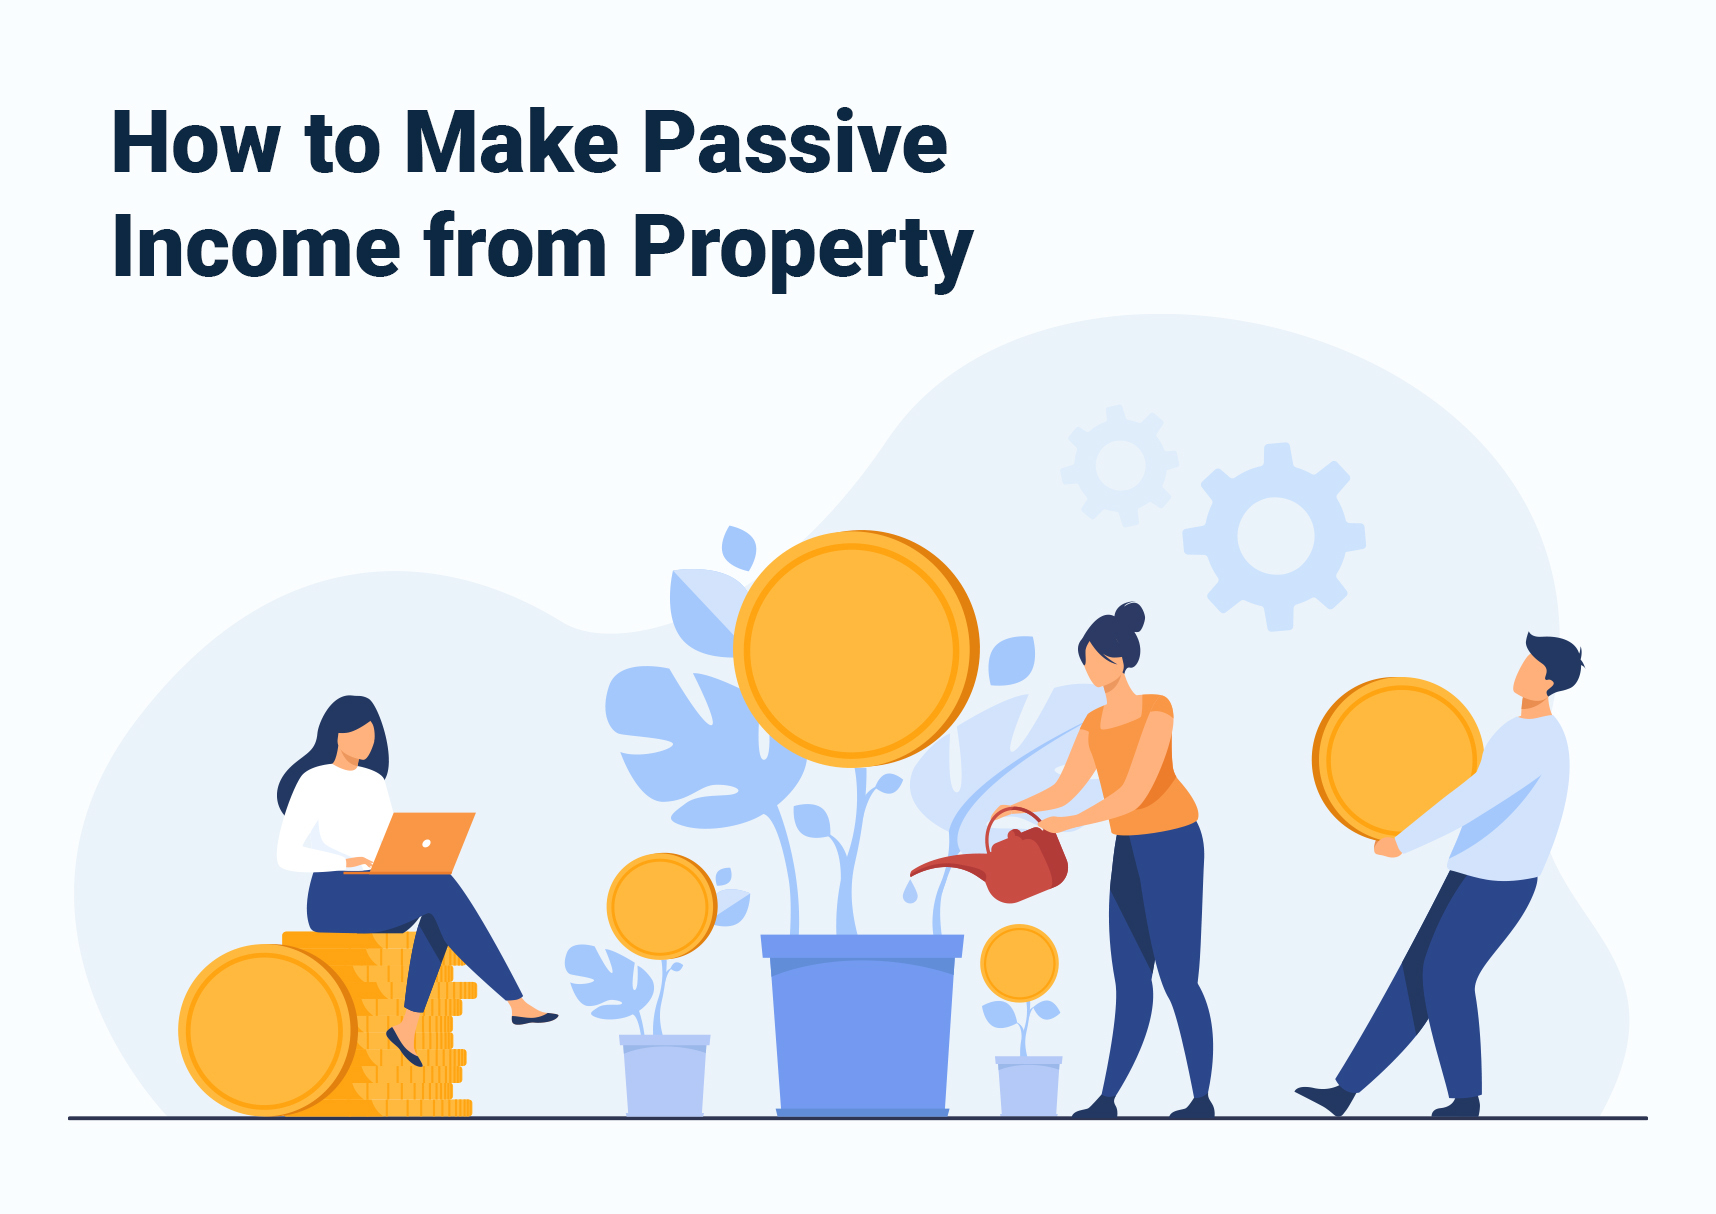 How to Make Passive Income from Property